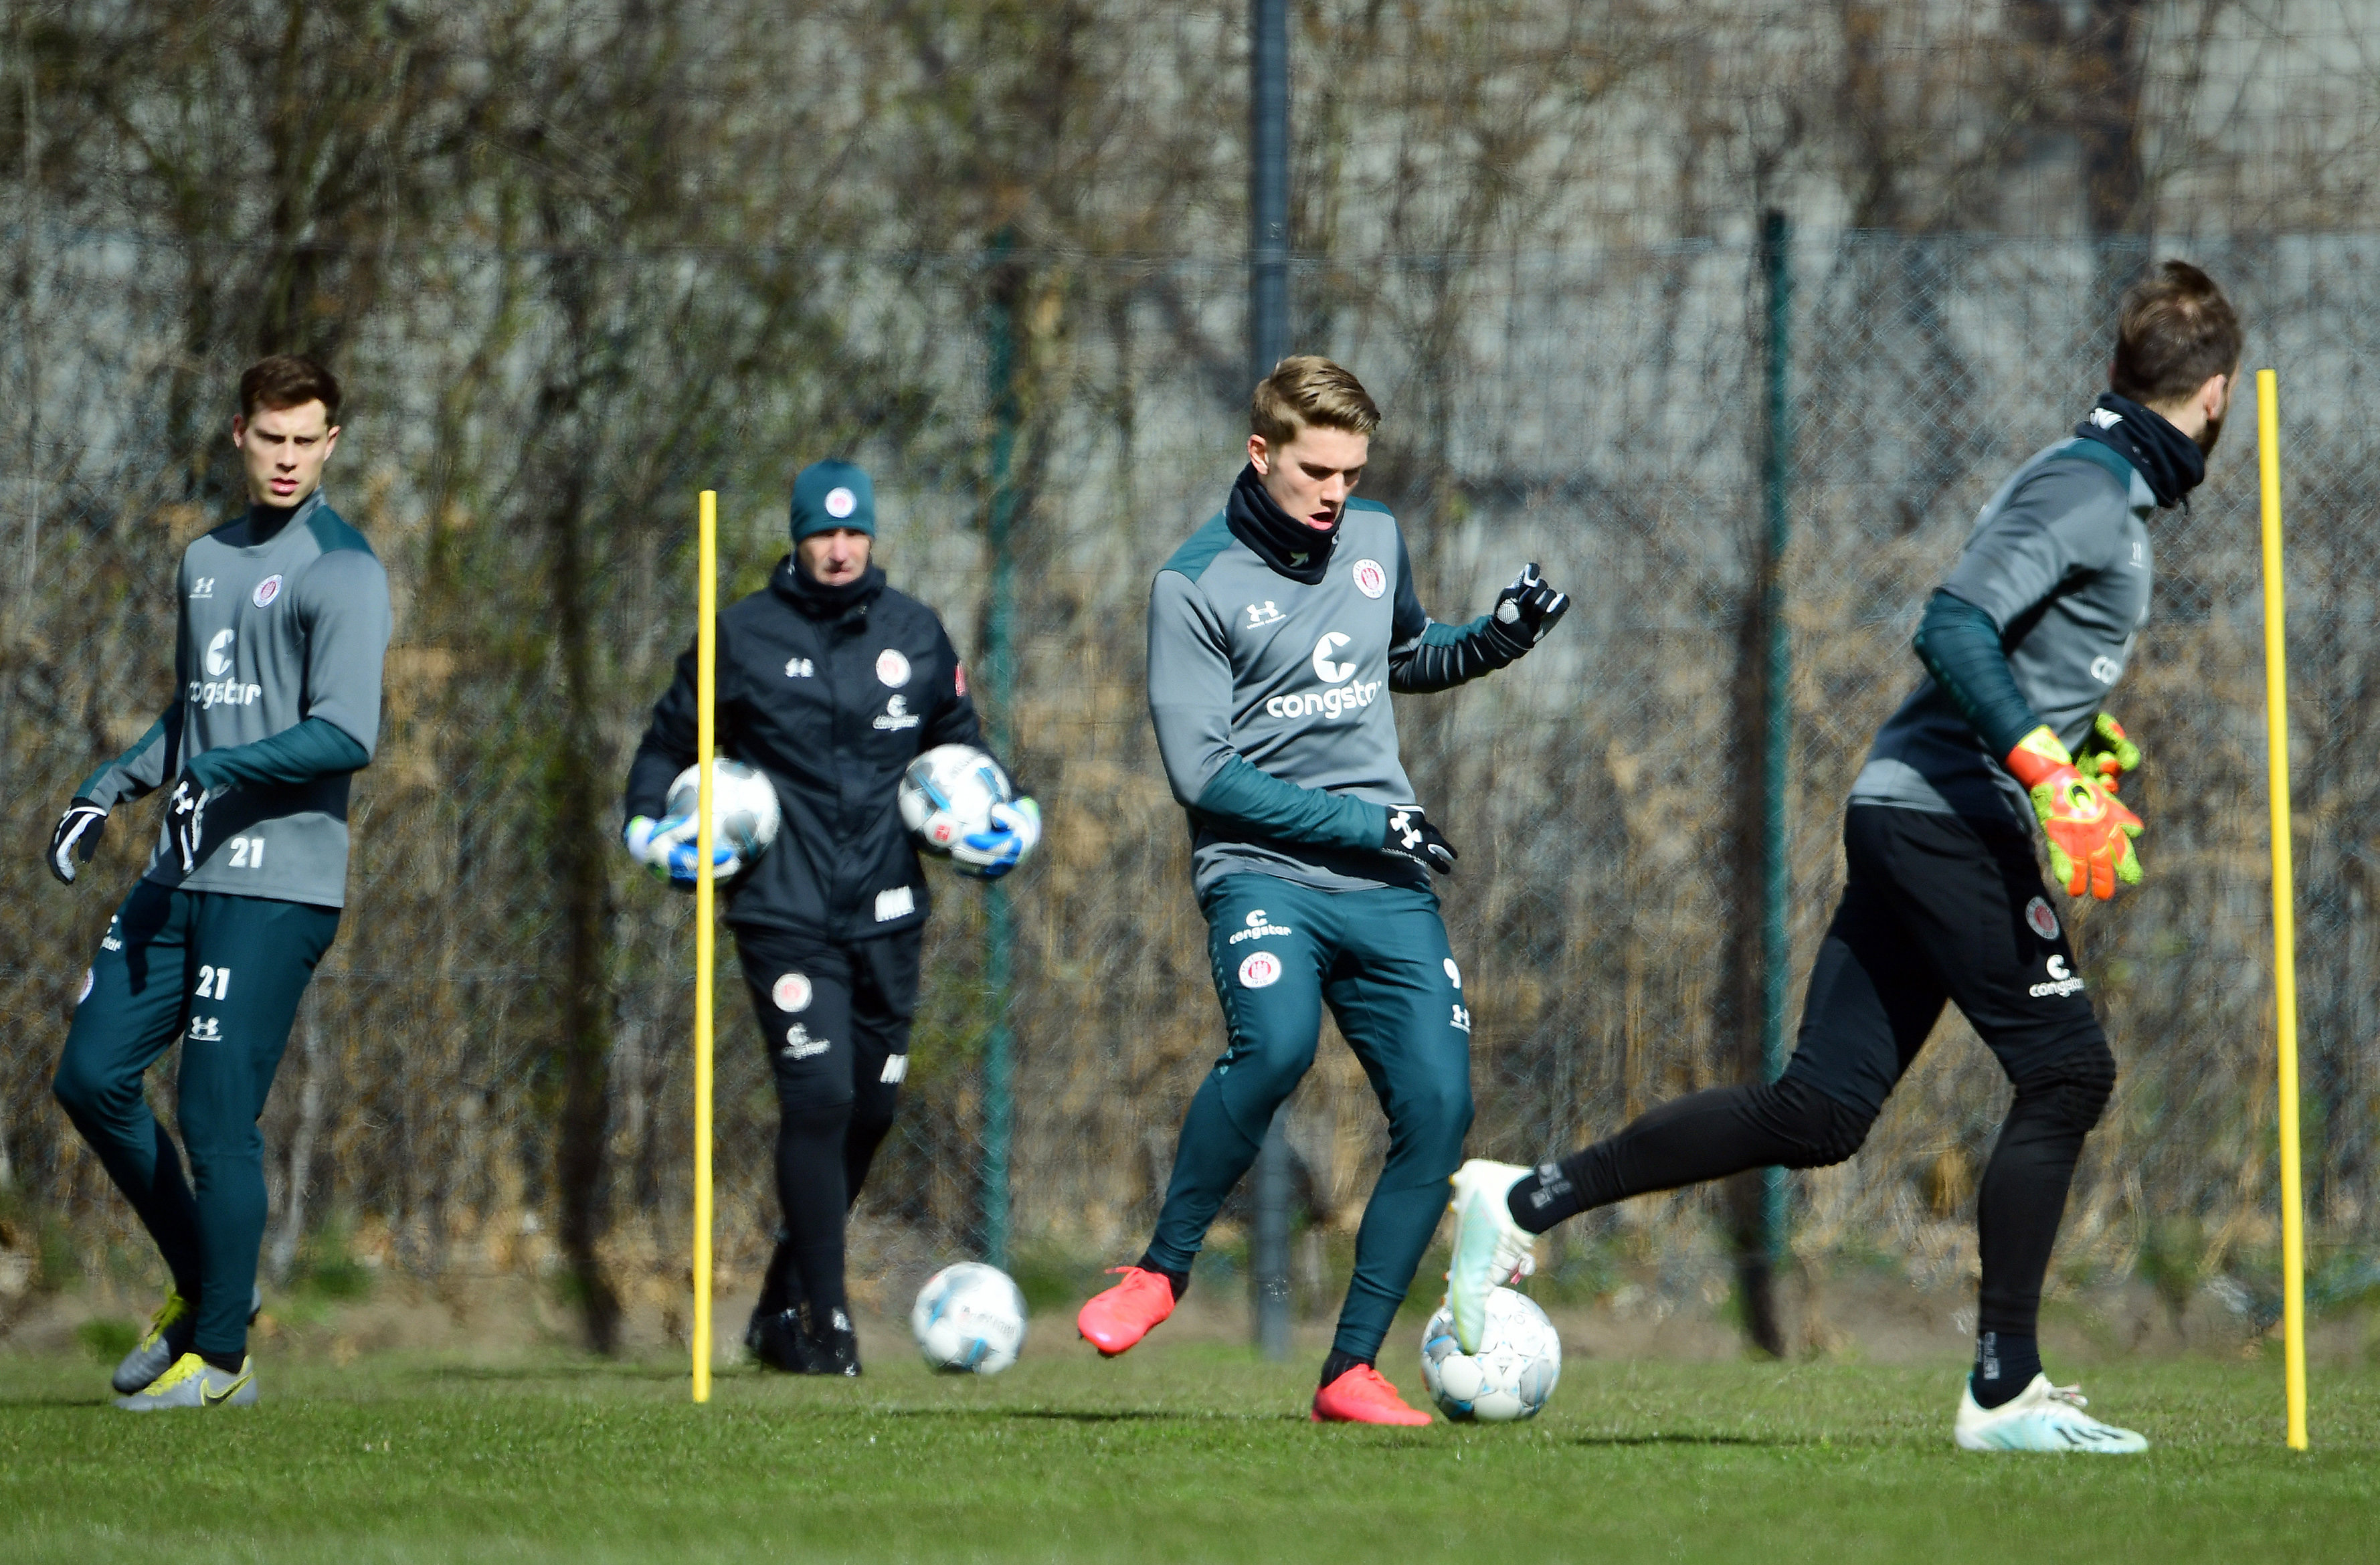 James Lawrence (left) training in his group with goalkeeper coach Mathias Hain (2nd from left), Viktor Gyökeres (2nd from right) and Robin Himmelmann (right).